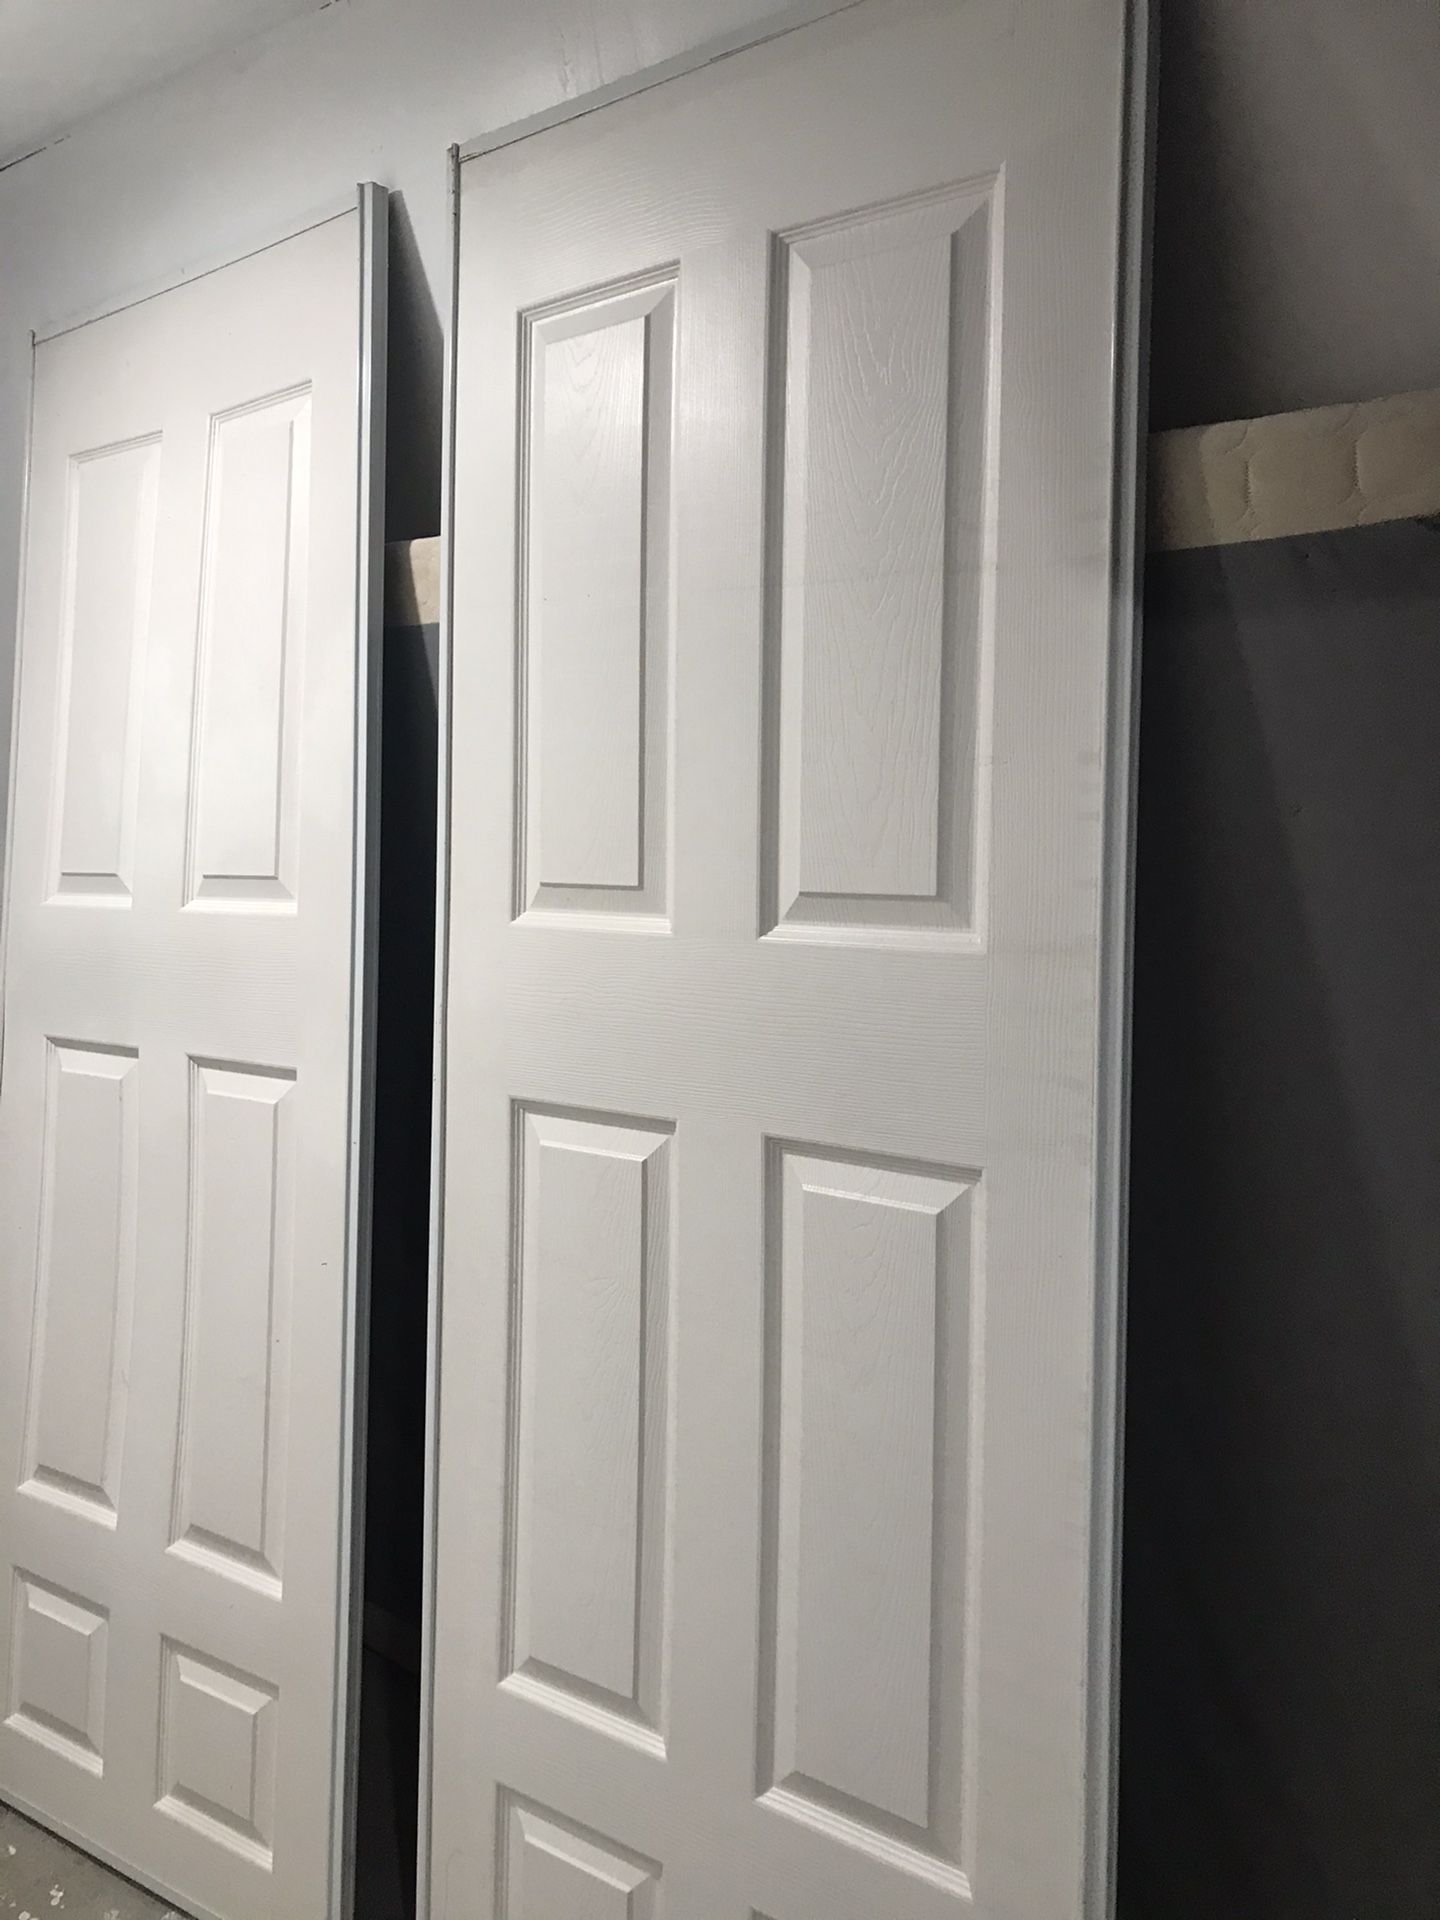 Closet slide door 30 inches by 2 wide—78 inches tall